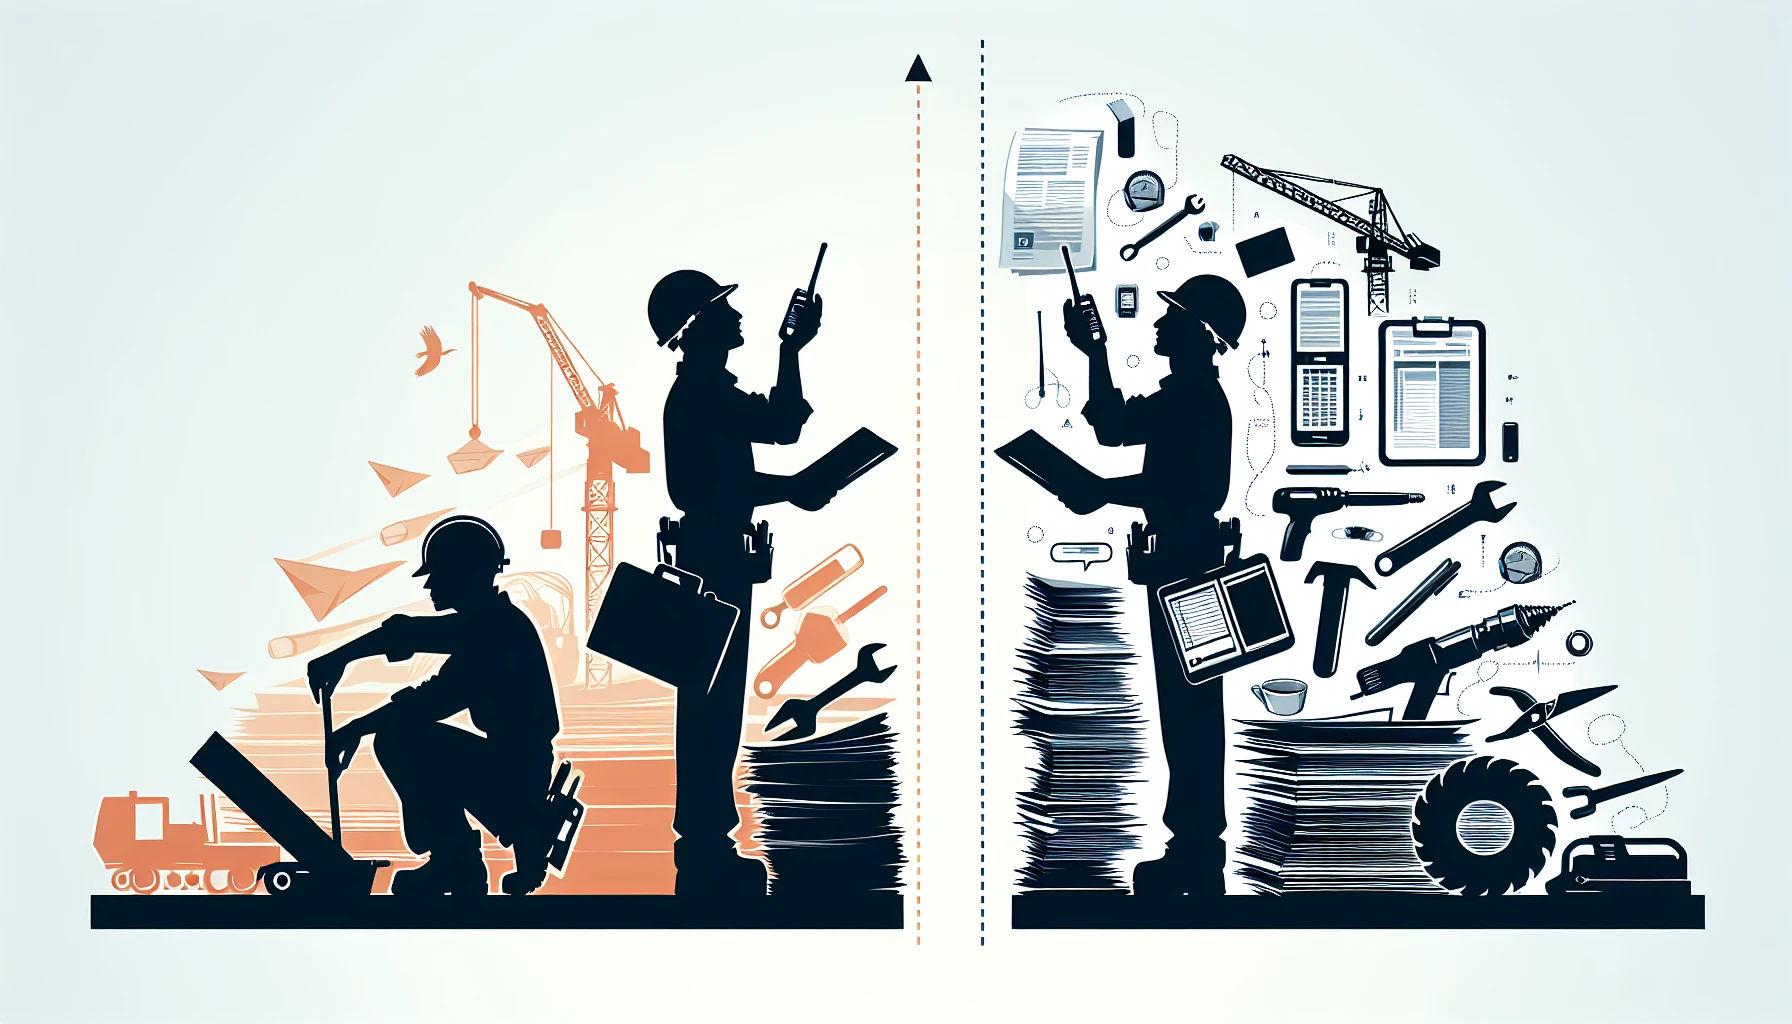 Project management in construction industry illustration with workers and evolving tools